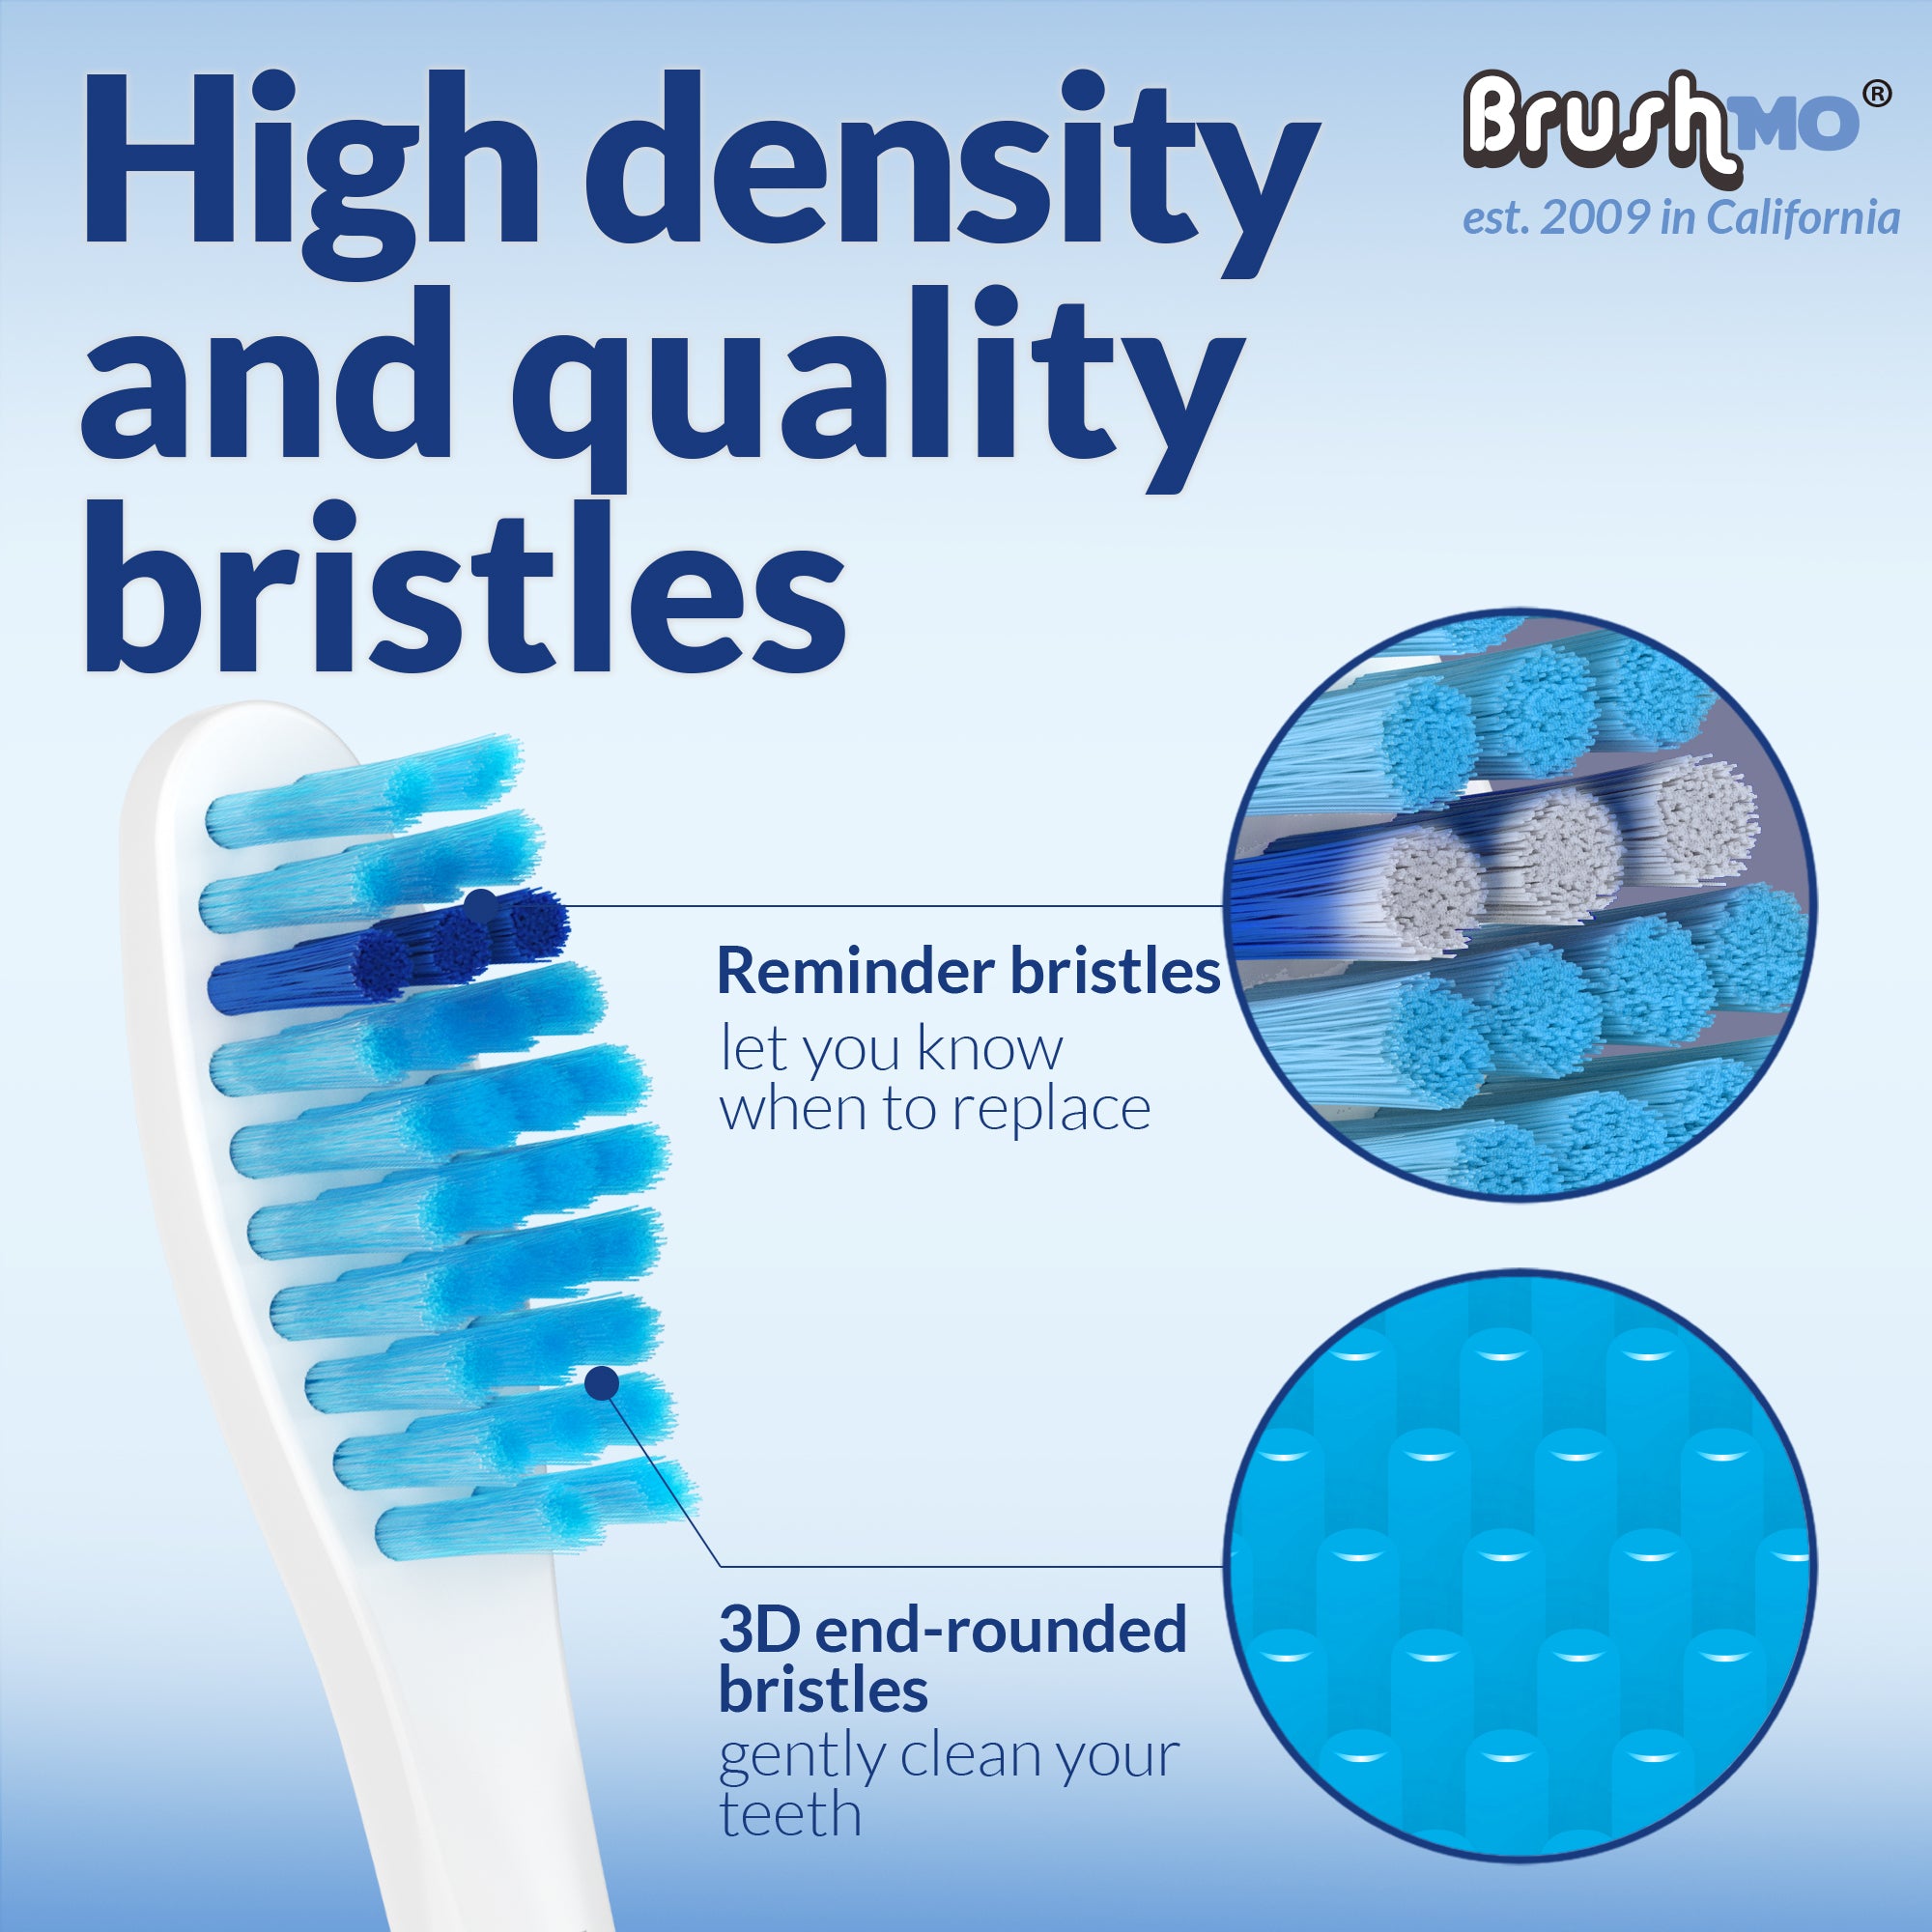 Replacement Toothbrush Heads for Philips Sonicare e-Series HX7052, 6 Pack Sensitive